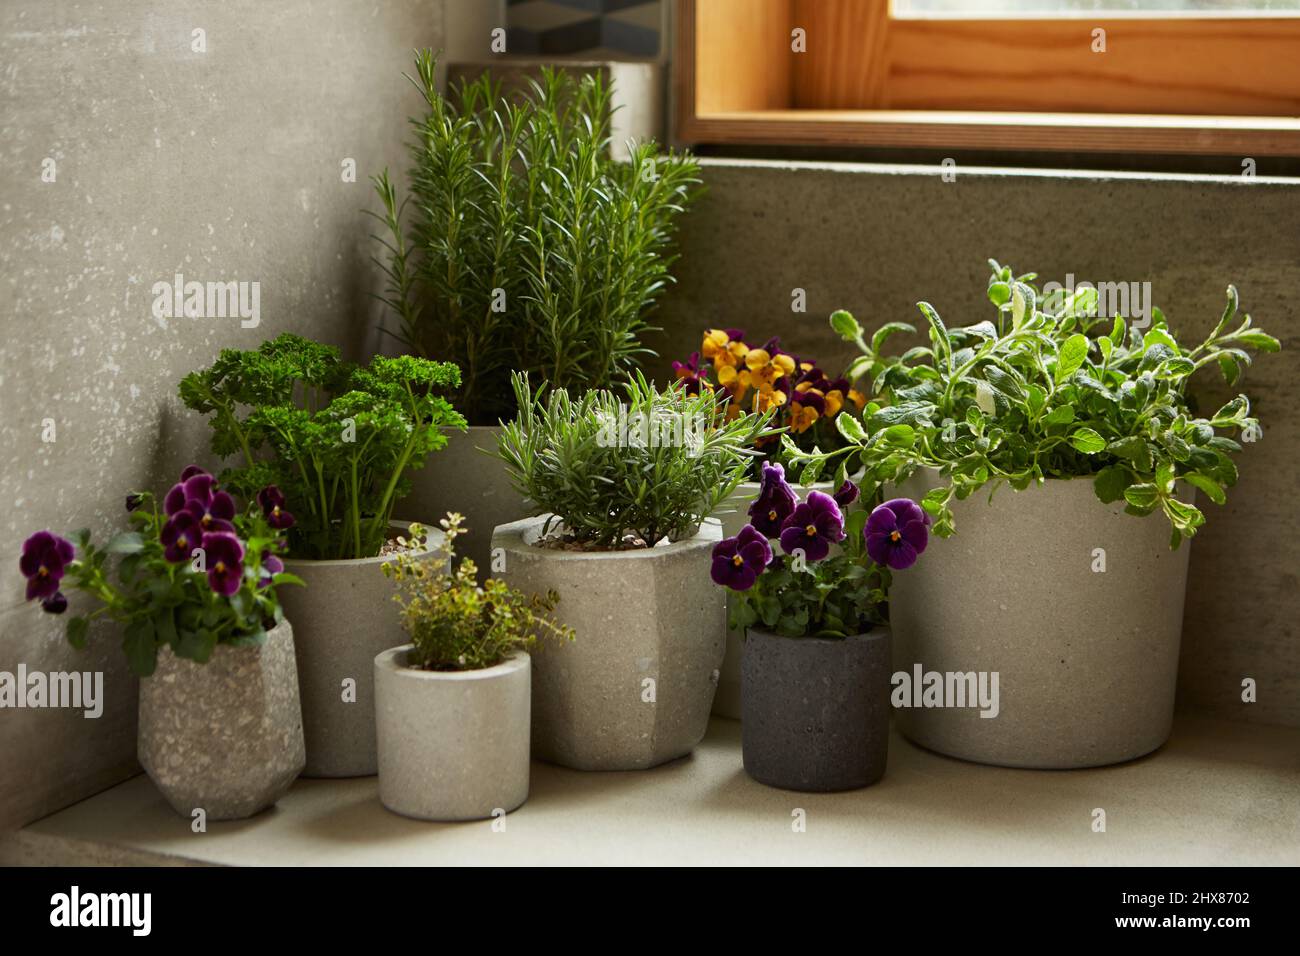 group of edible herbs and violas in concret pots Stock Photo